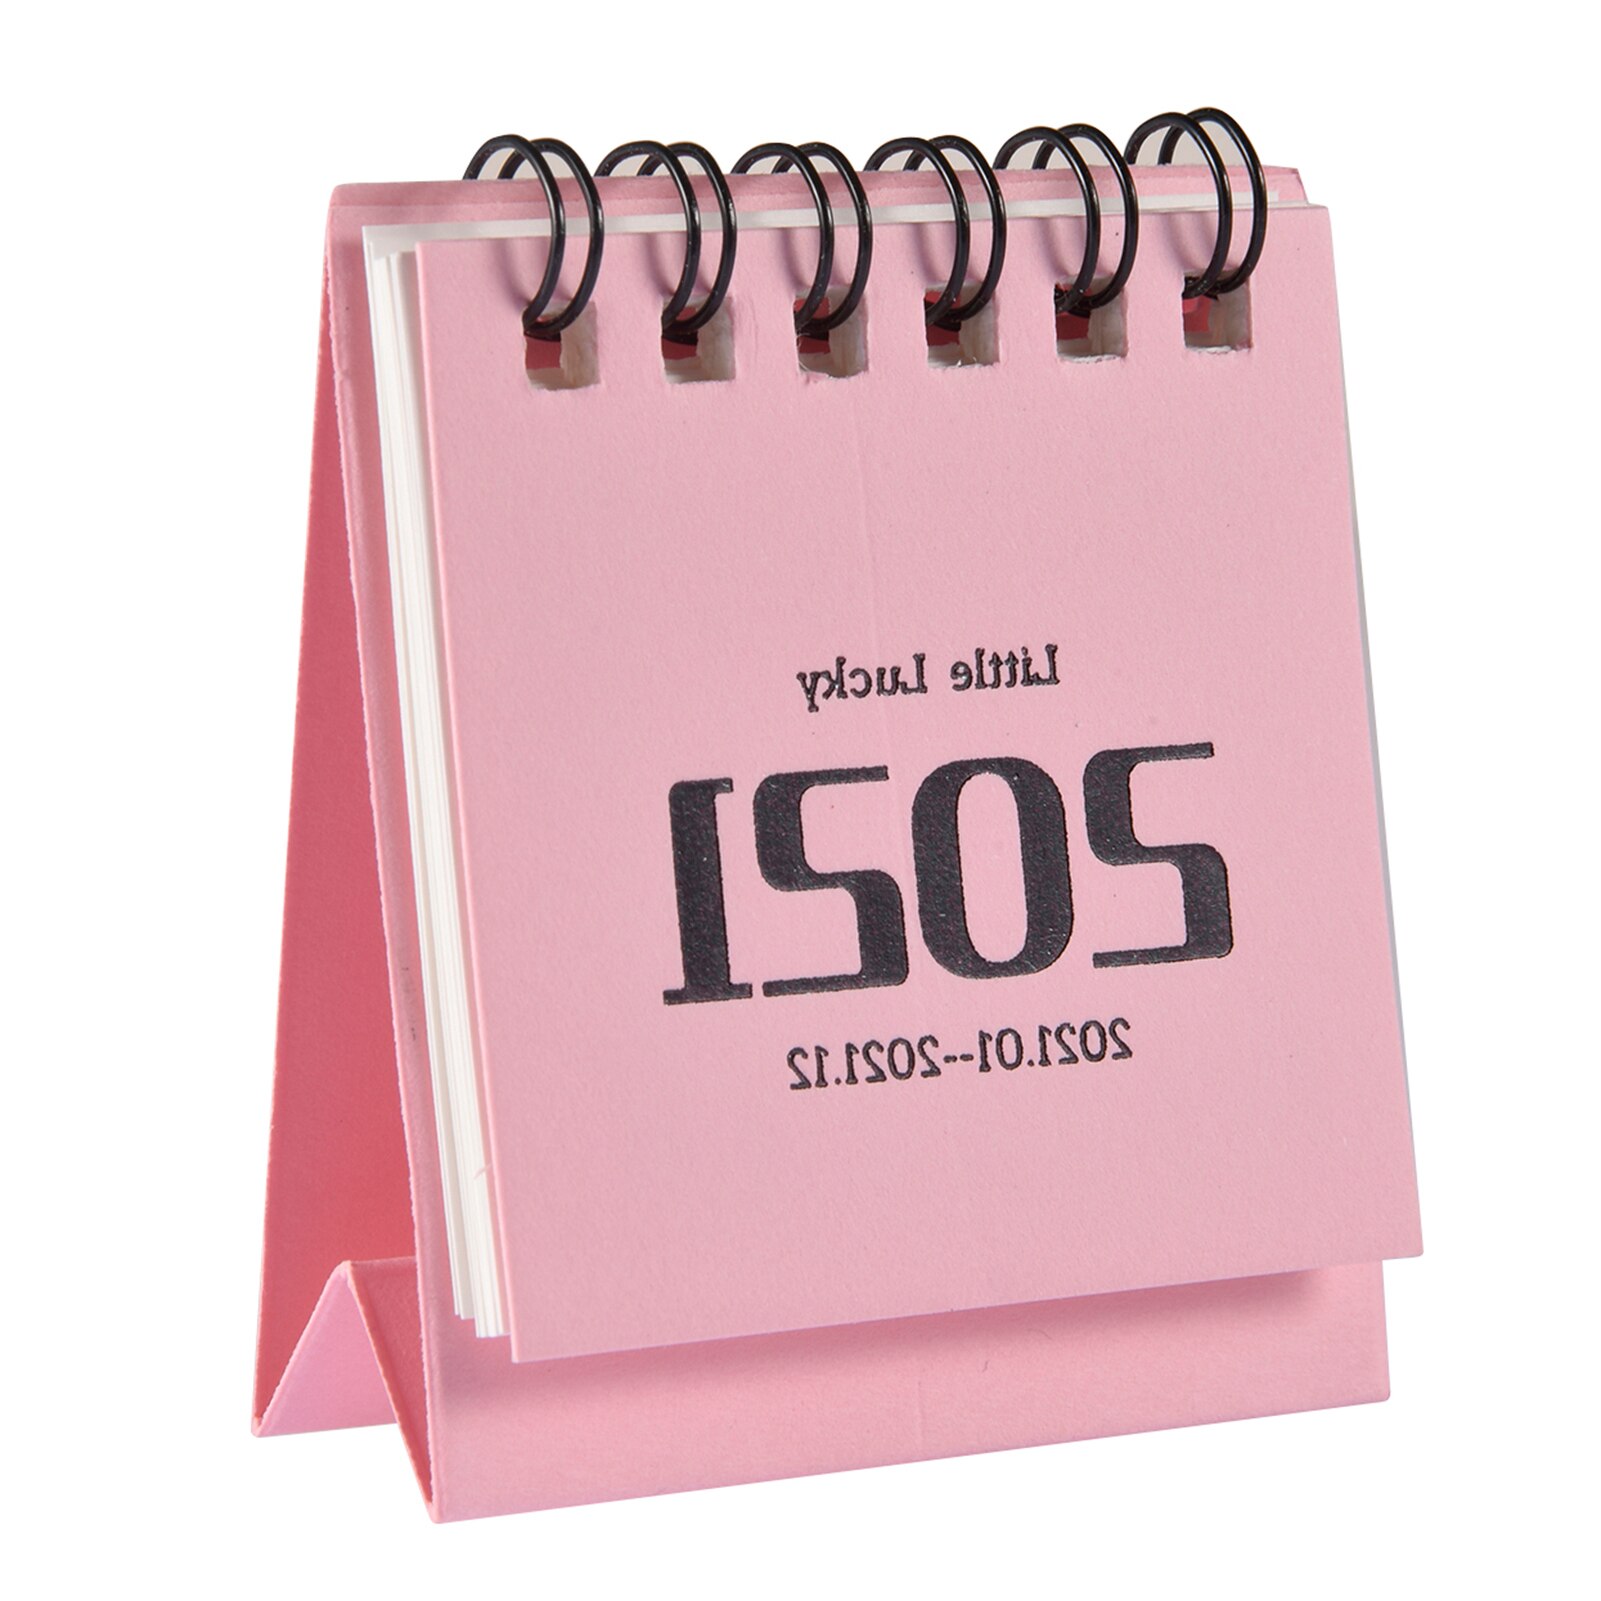 Mini Calendars Small Desk Calendar Convenient Daily Schedule Table Planner Yearly Organizer Office School Supplies: Pink